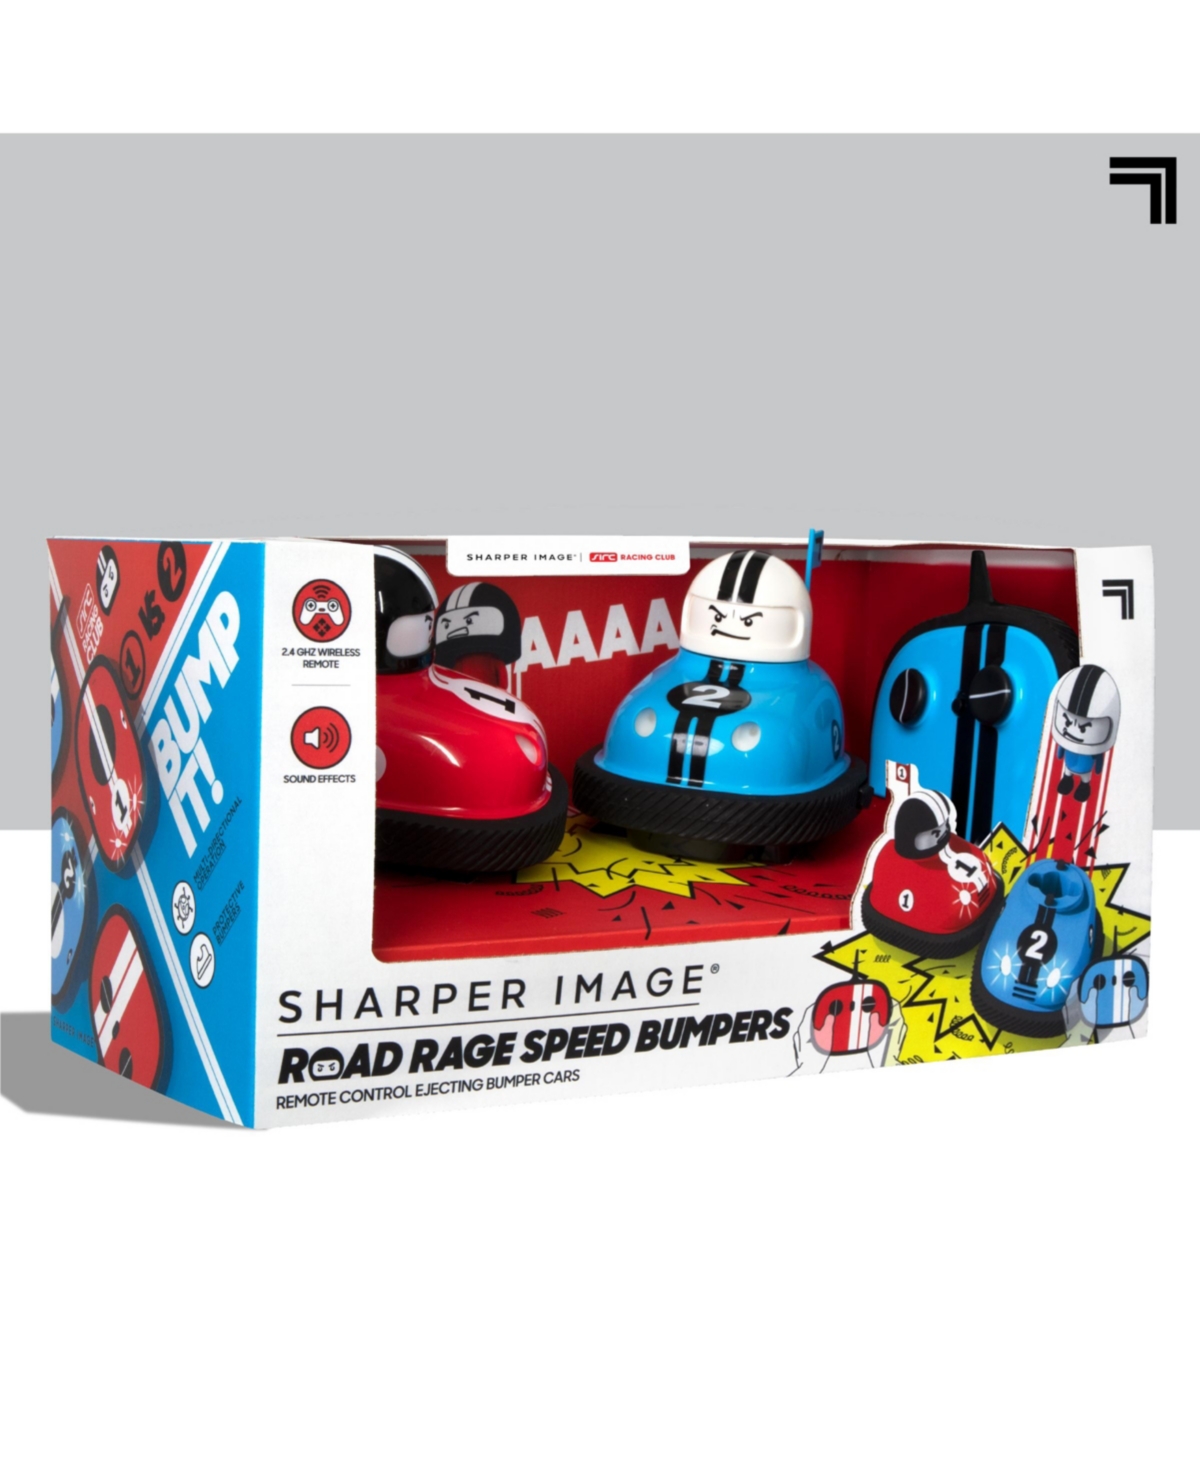 Shop Sharper Image Road Rage Rc Speed Bumper Cars In Red And Blue